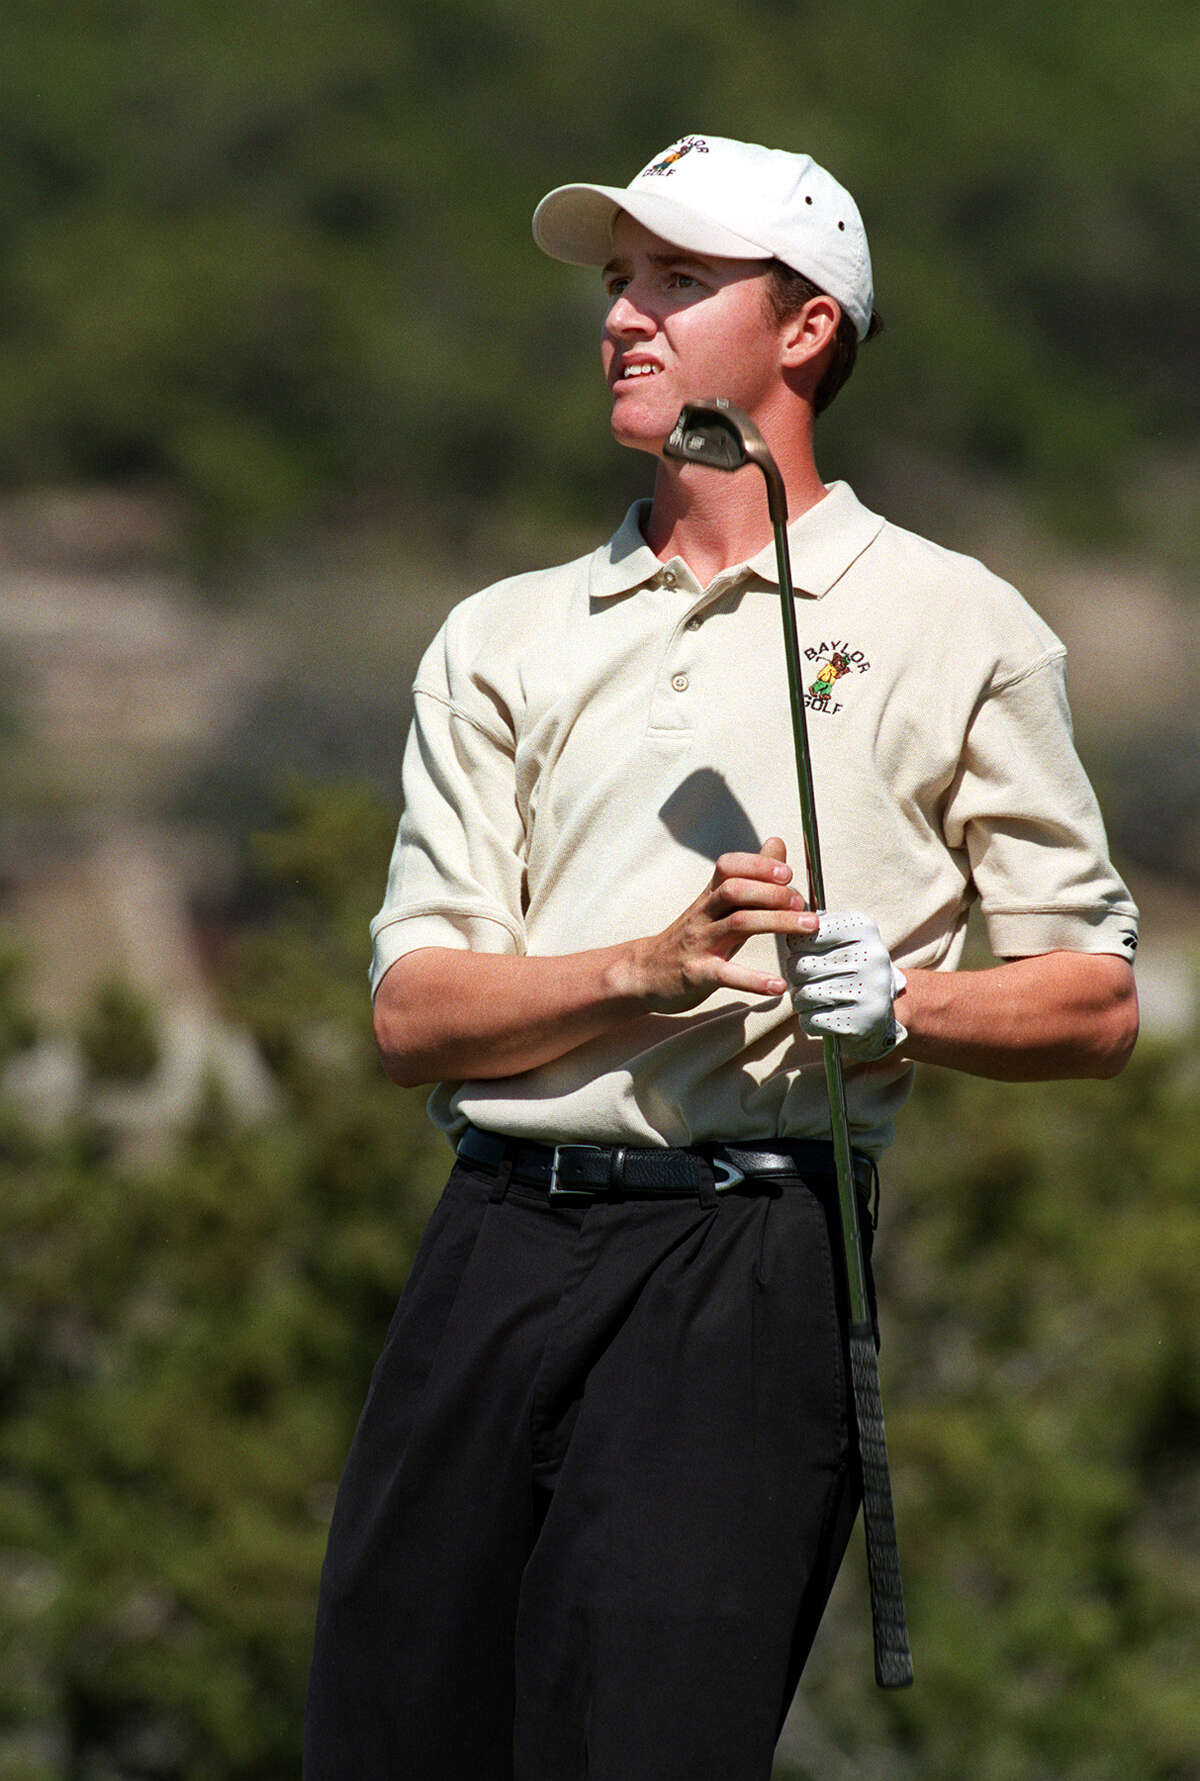 Baylor's Jimmy Walker watches the ball at the 13th hole at La Cantera during the UTSA invitational on Feb. 24, 1998.